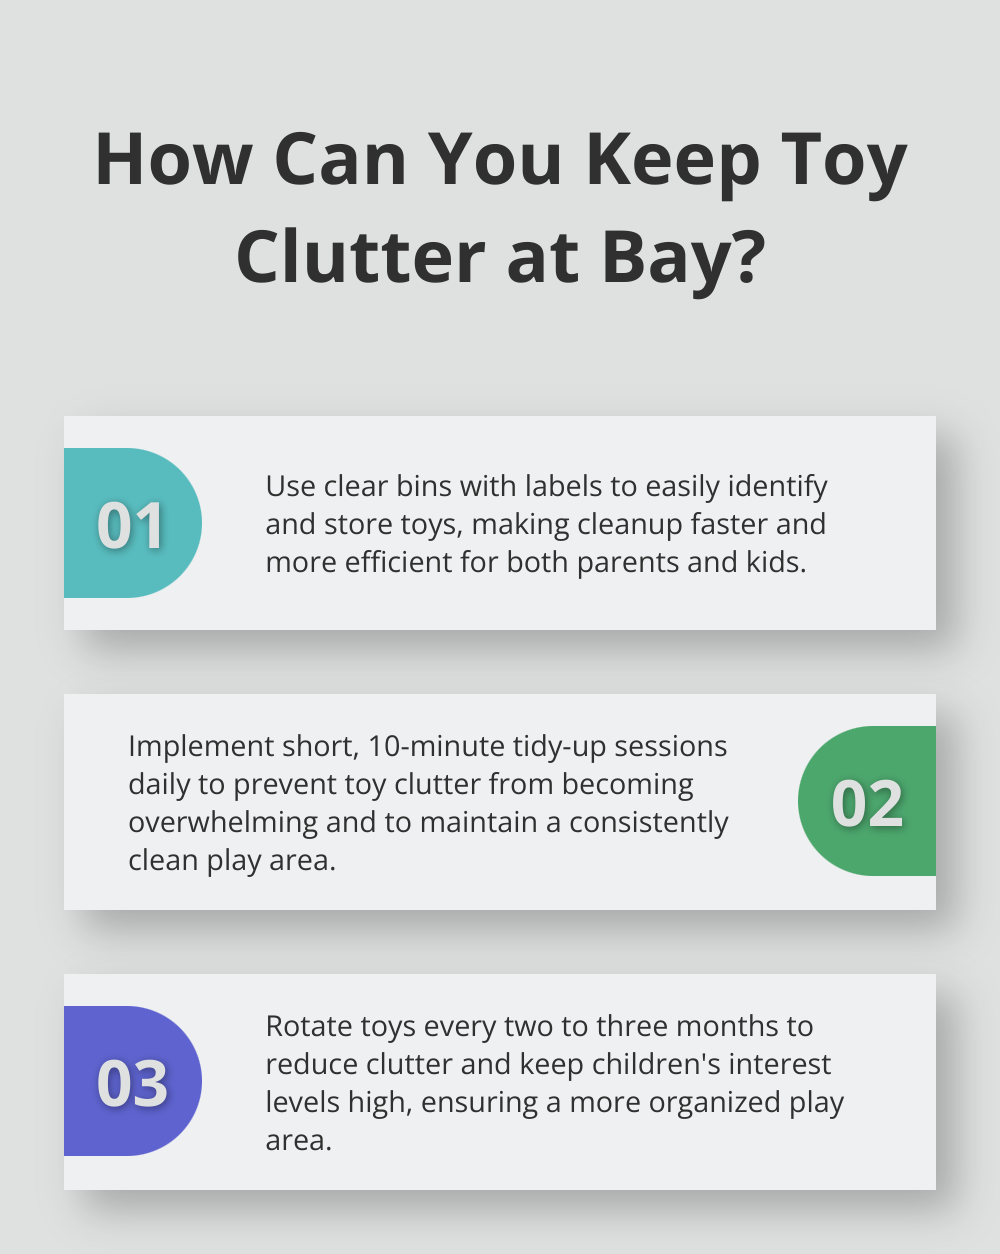 Fact - How Can You Keep Toy Clutter at Bay?